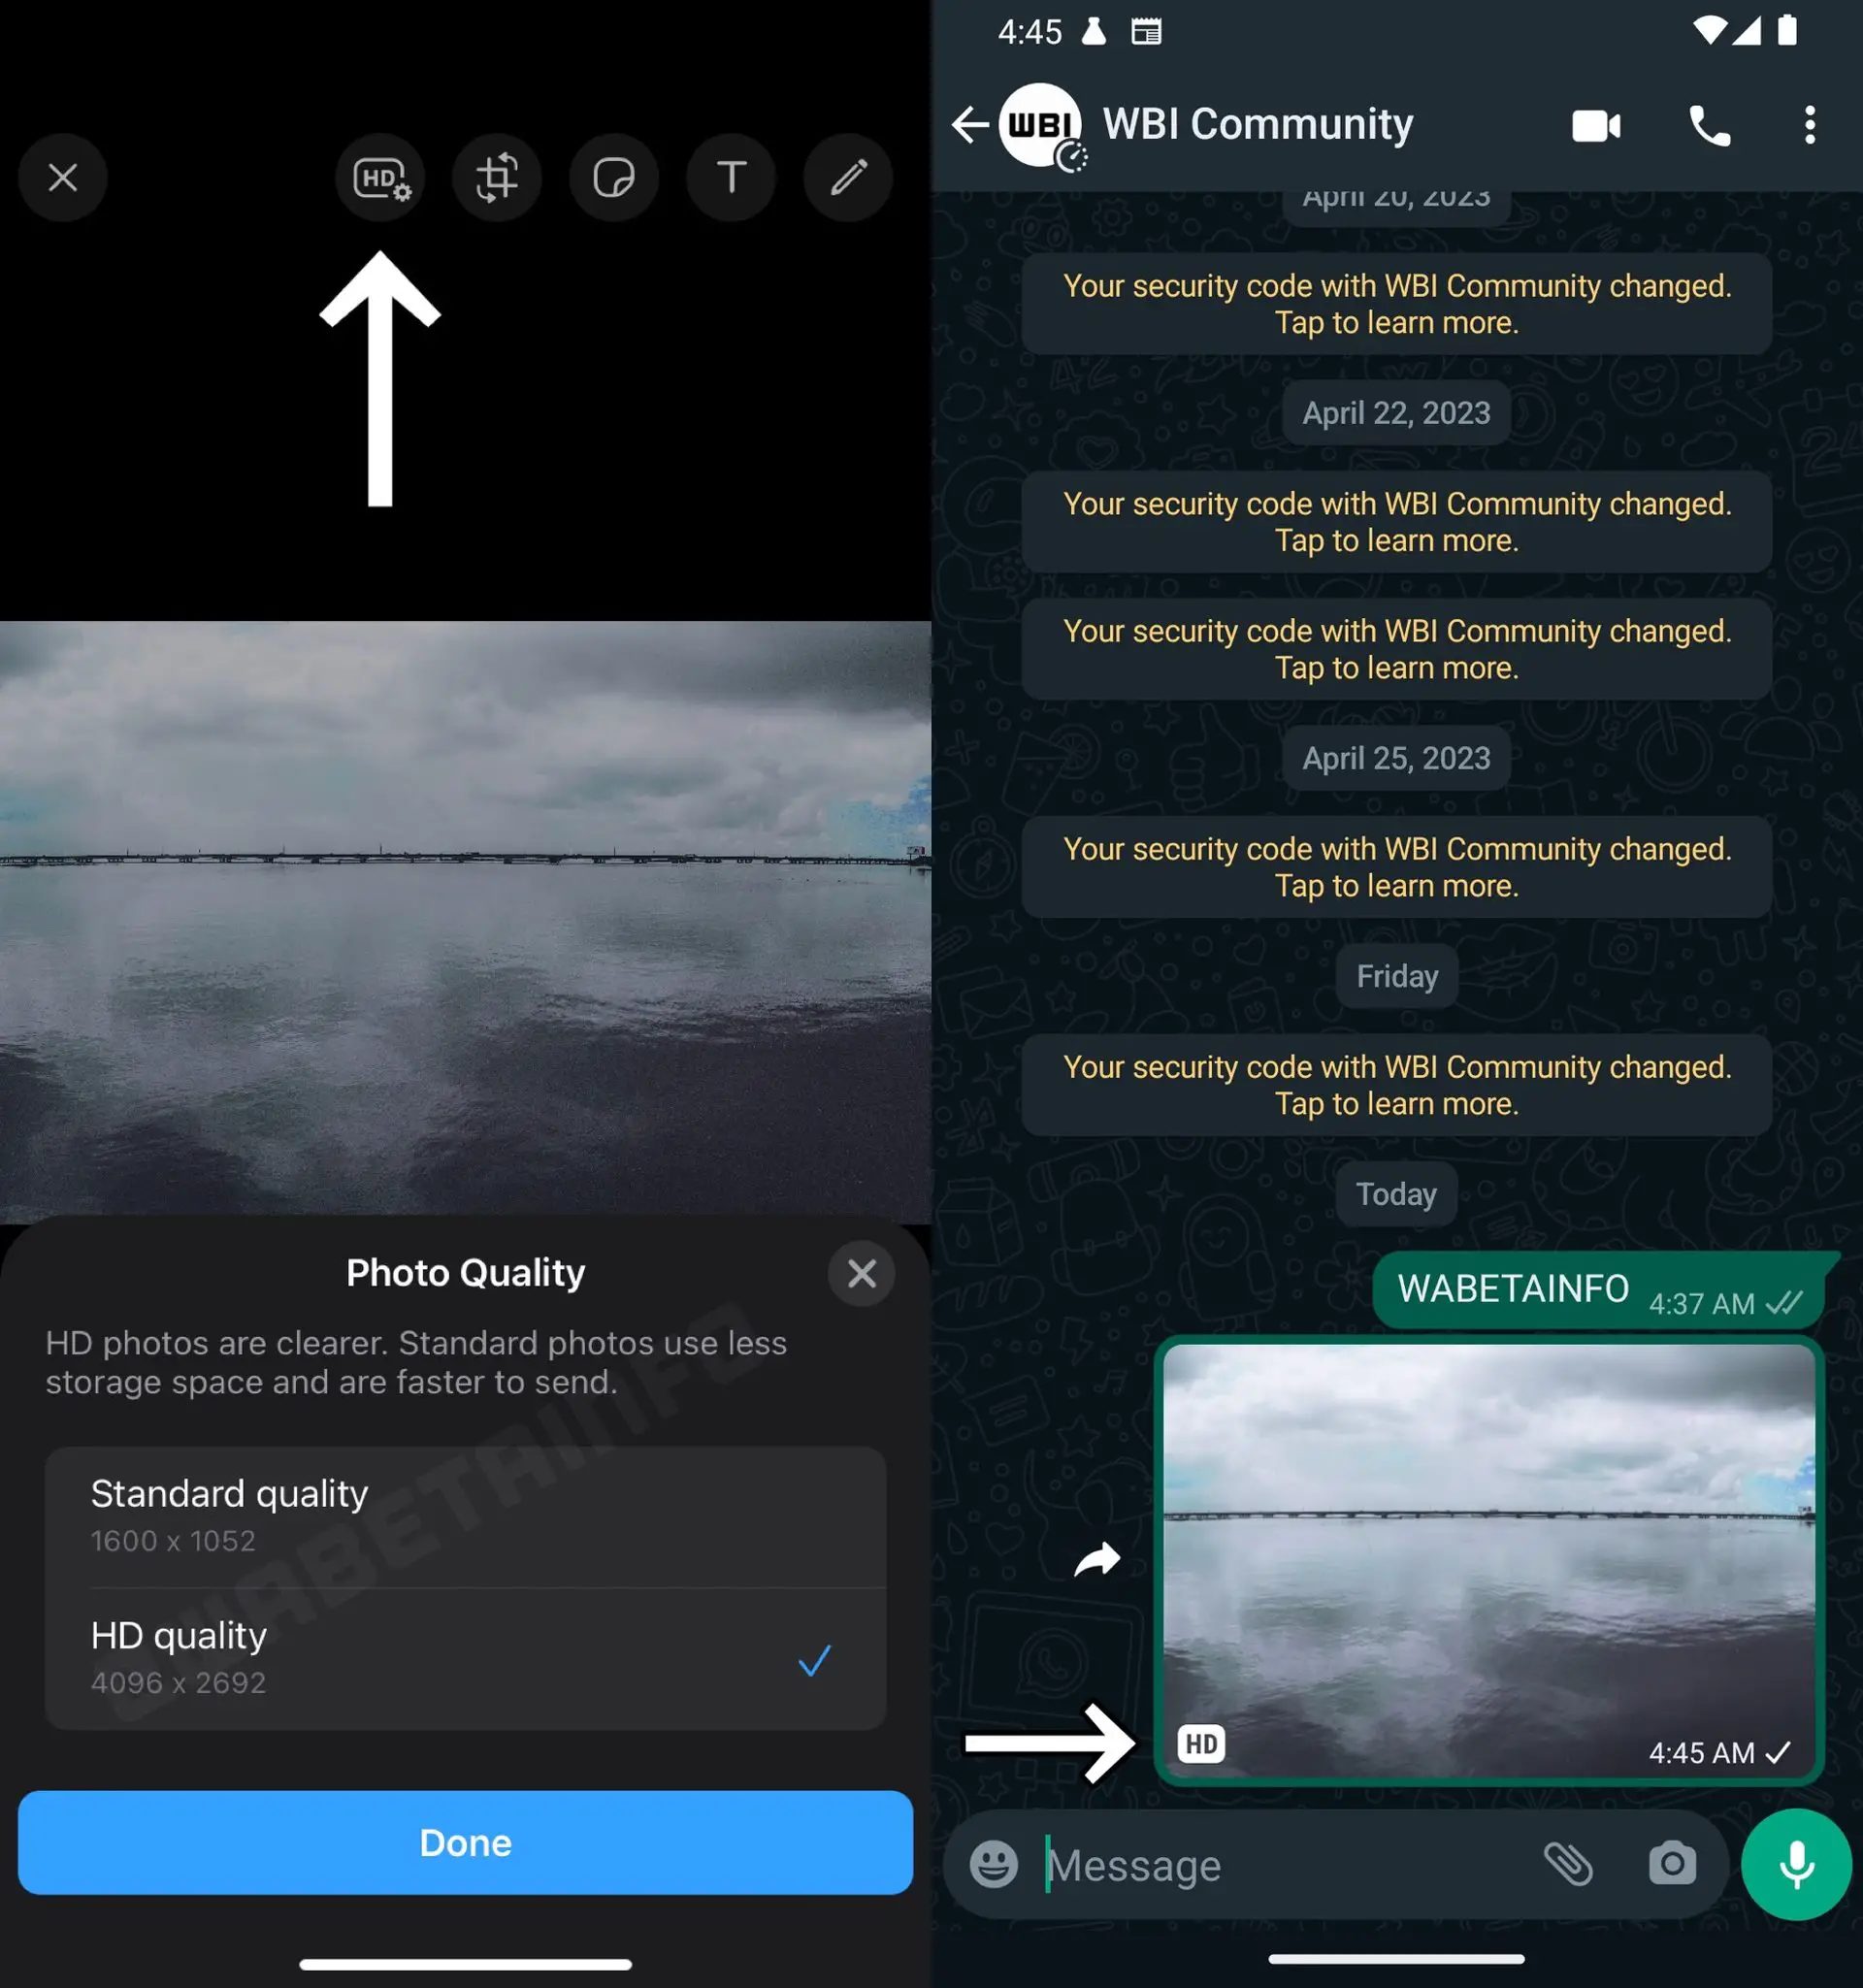 WhatsApp HD photos: Keep reading and learn how to send HD photos in Whatsapp. Whatsapp HD videos are also on the way!